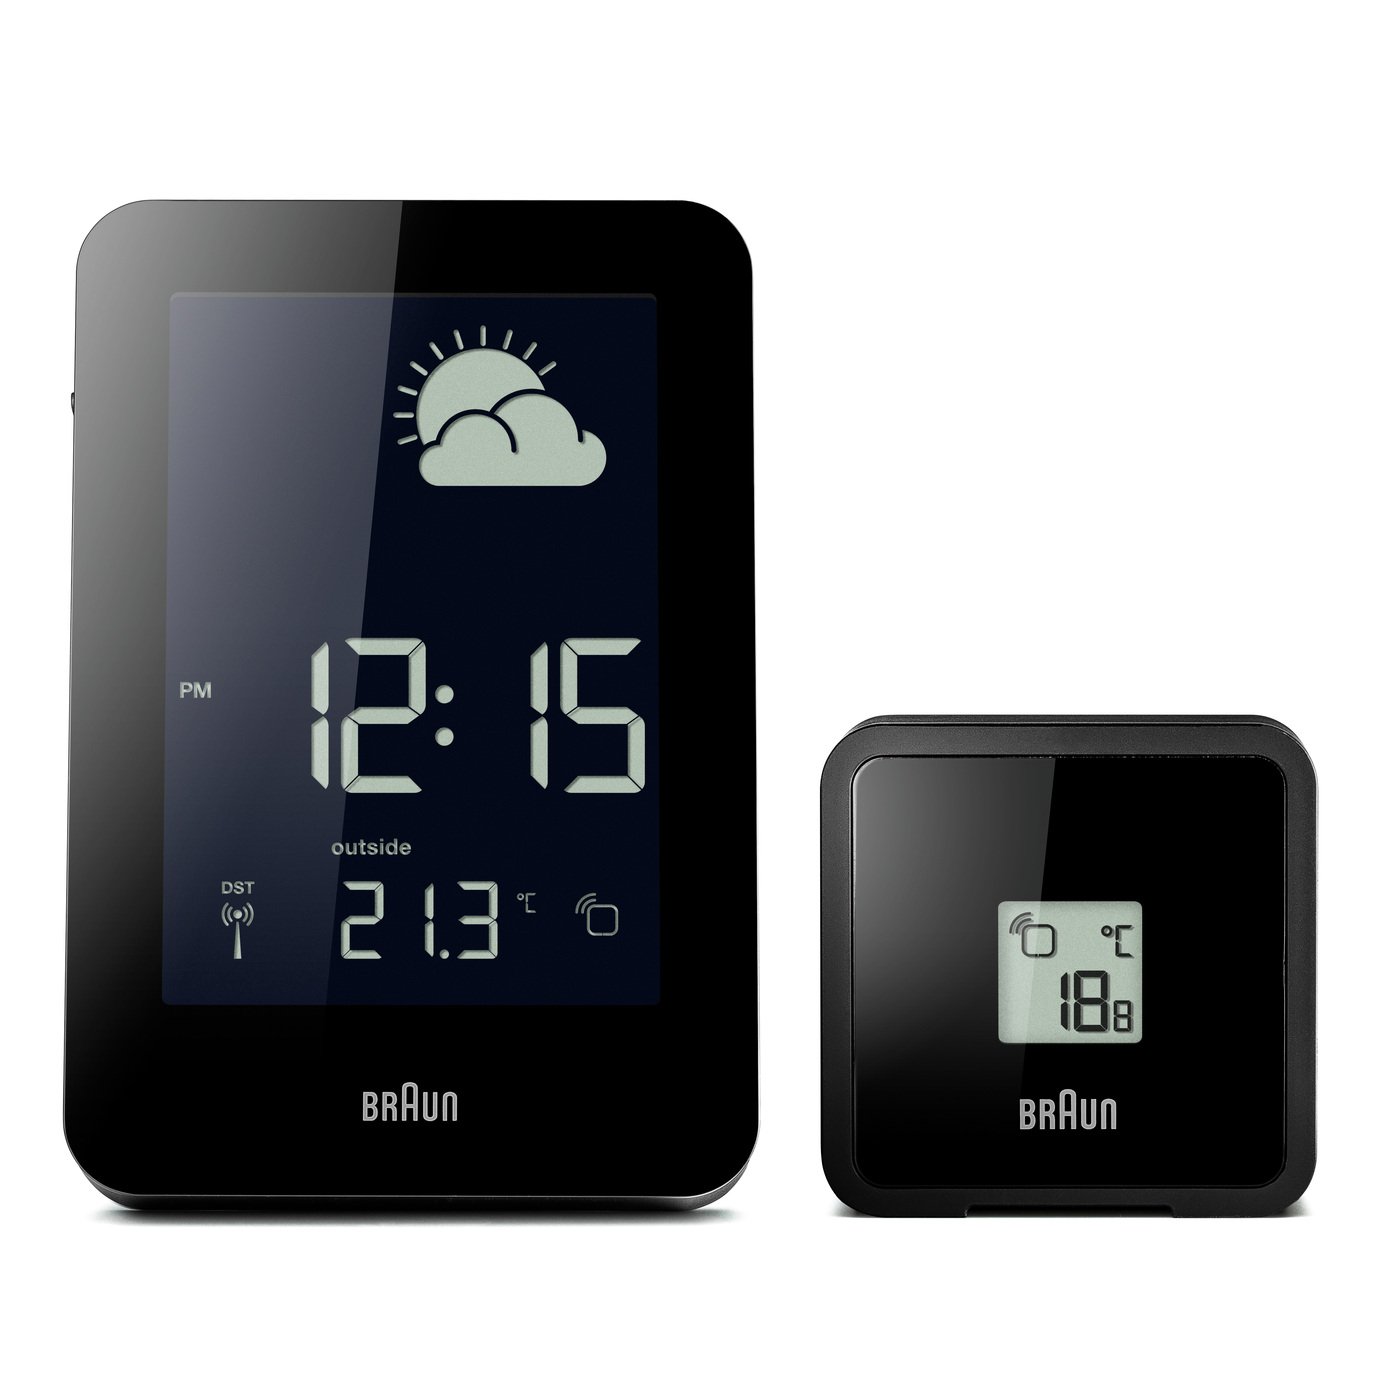 Braun Weather Station Review